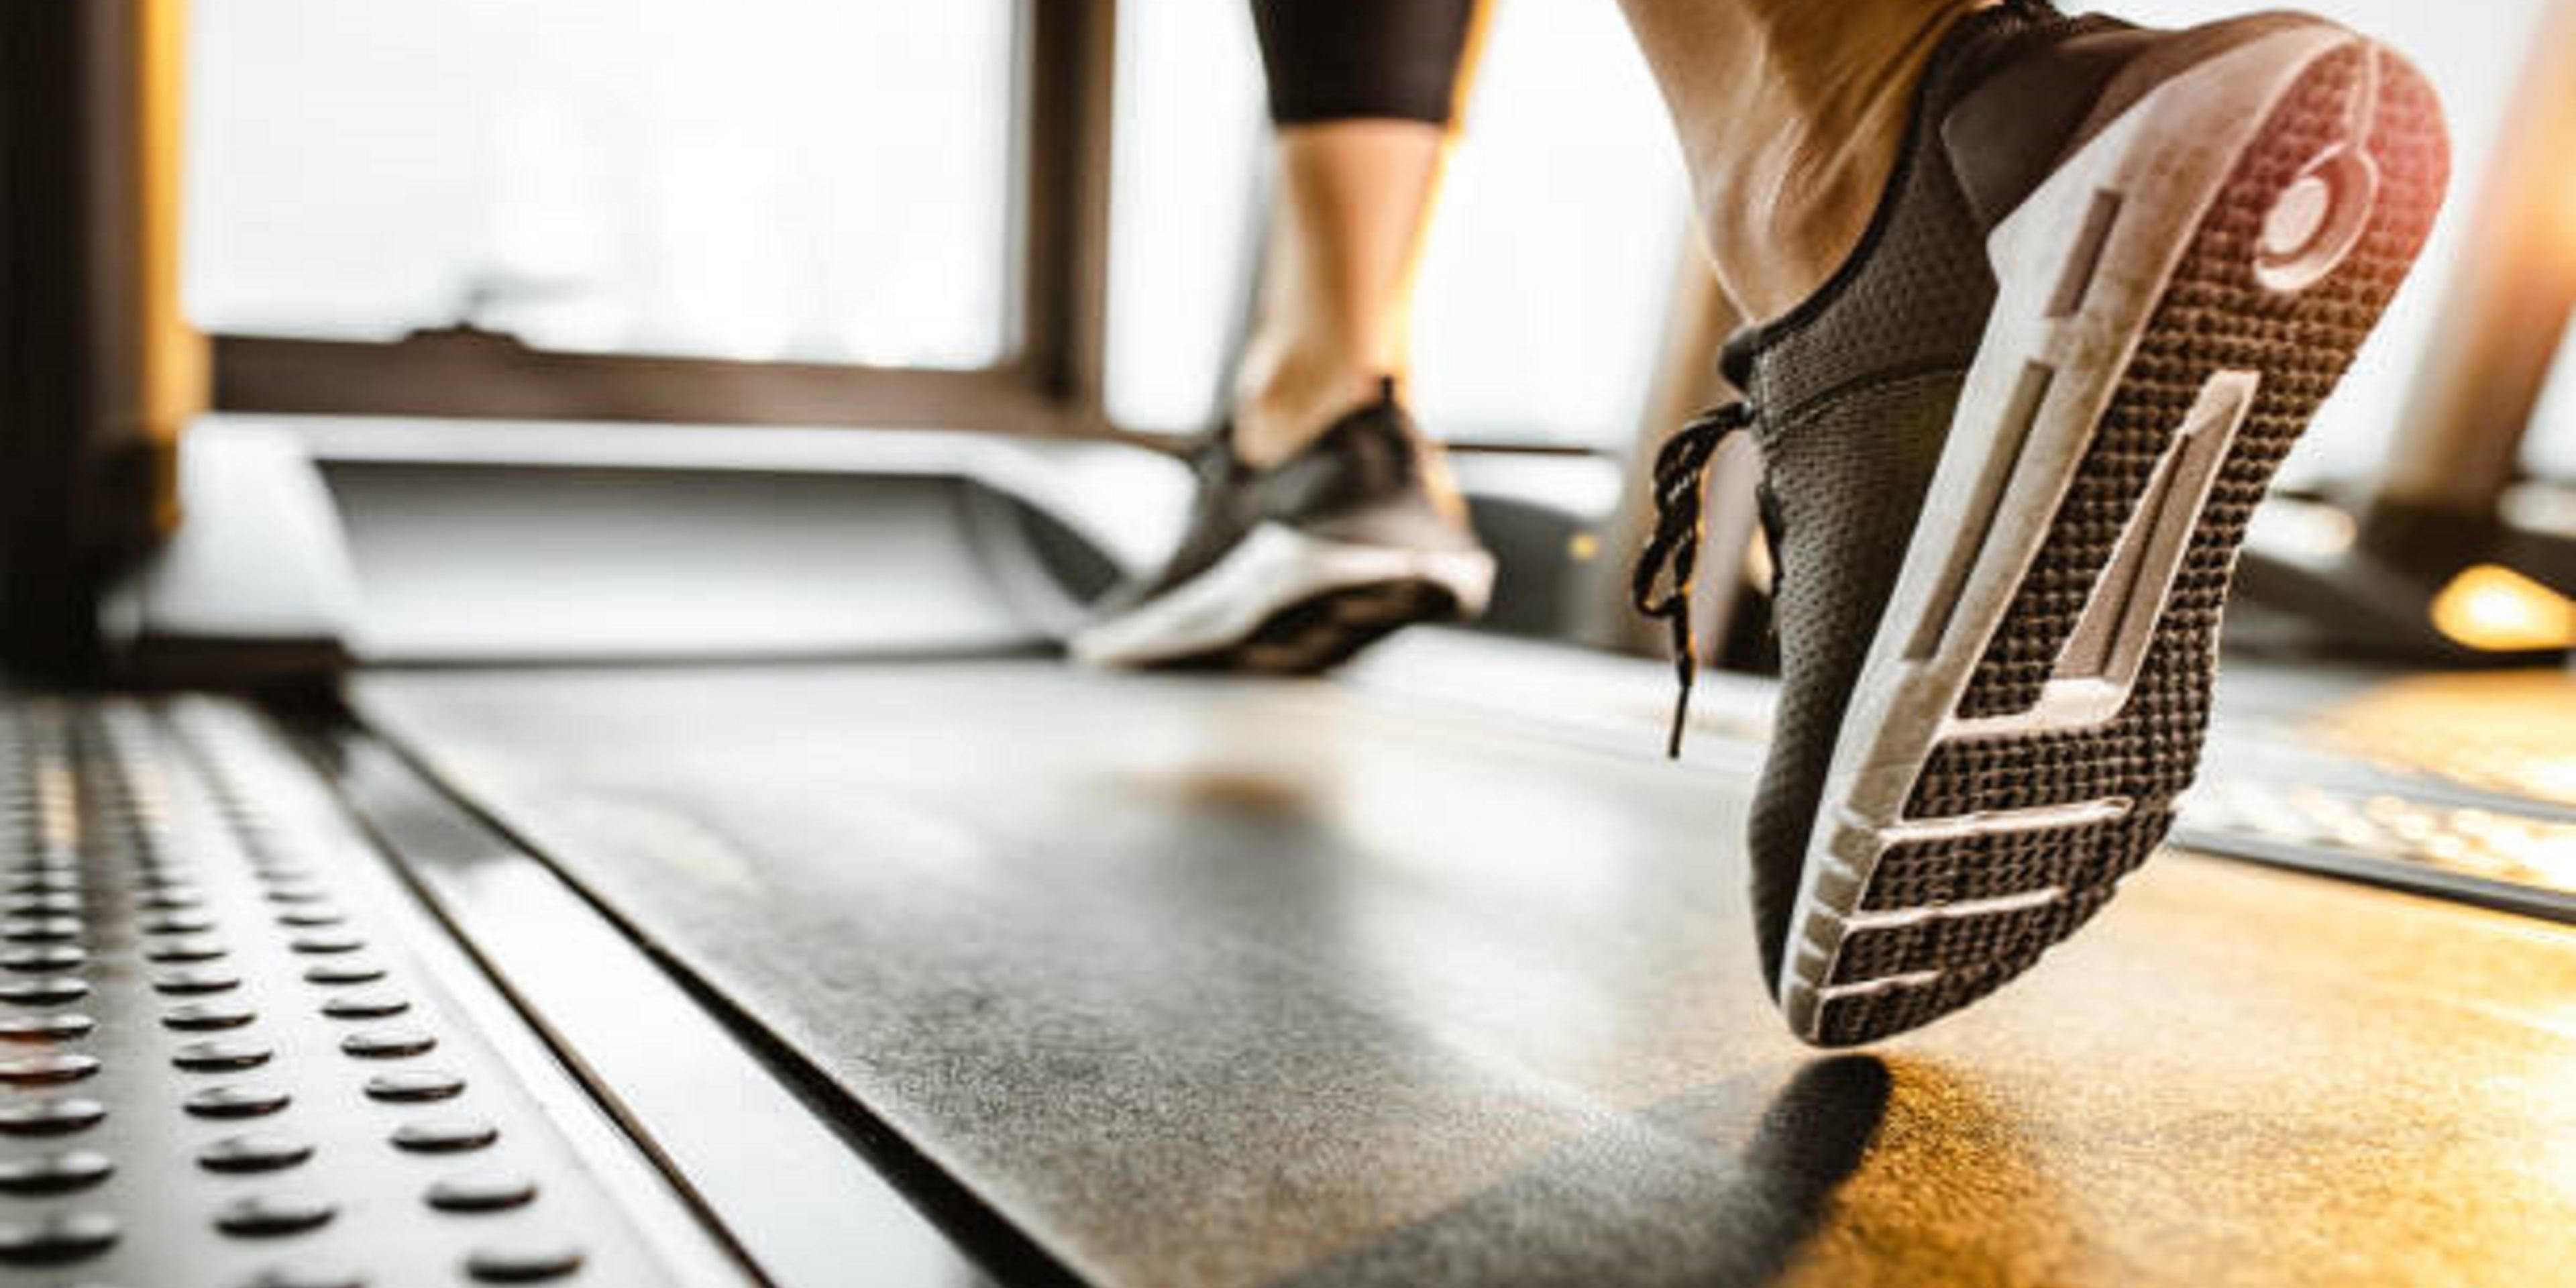 Get your sweat on in our complimentary, fully equipped Fitness Center with treadmill, bike, resistance band, free weights, exercise ball. Open 24-hours.